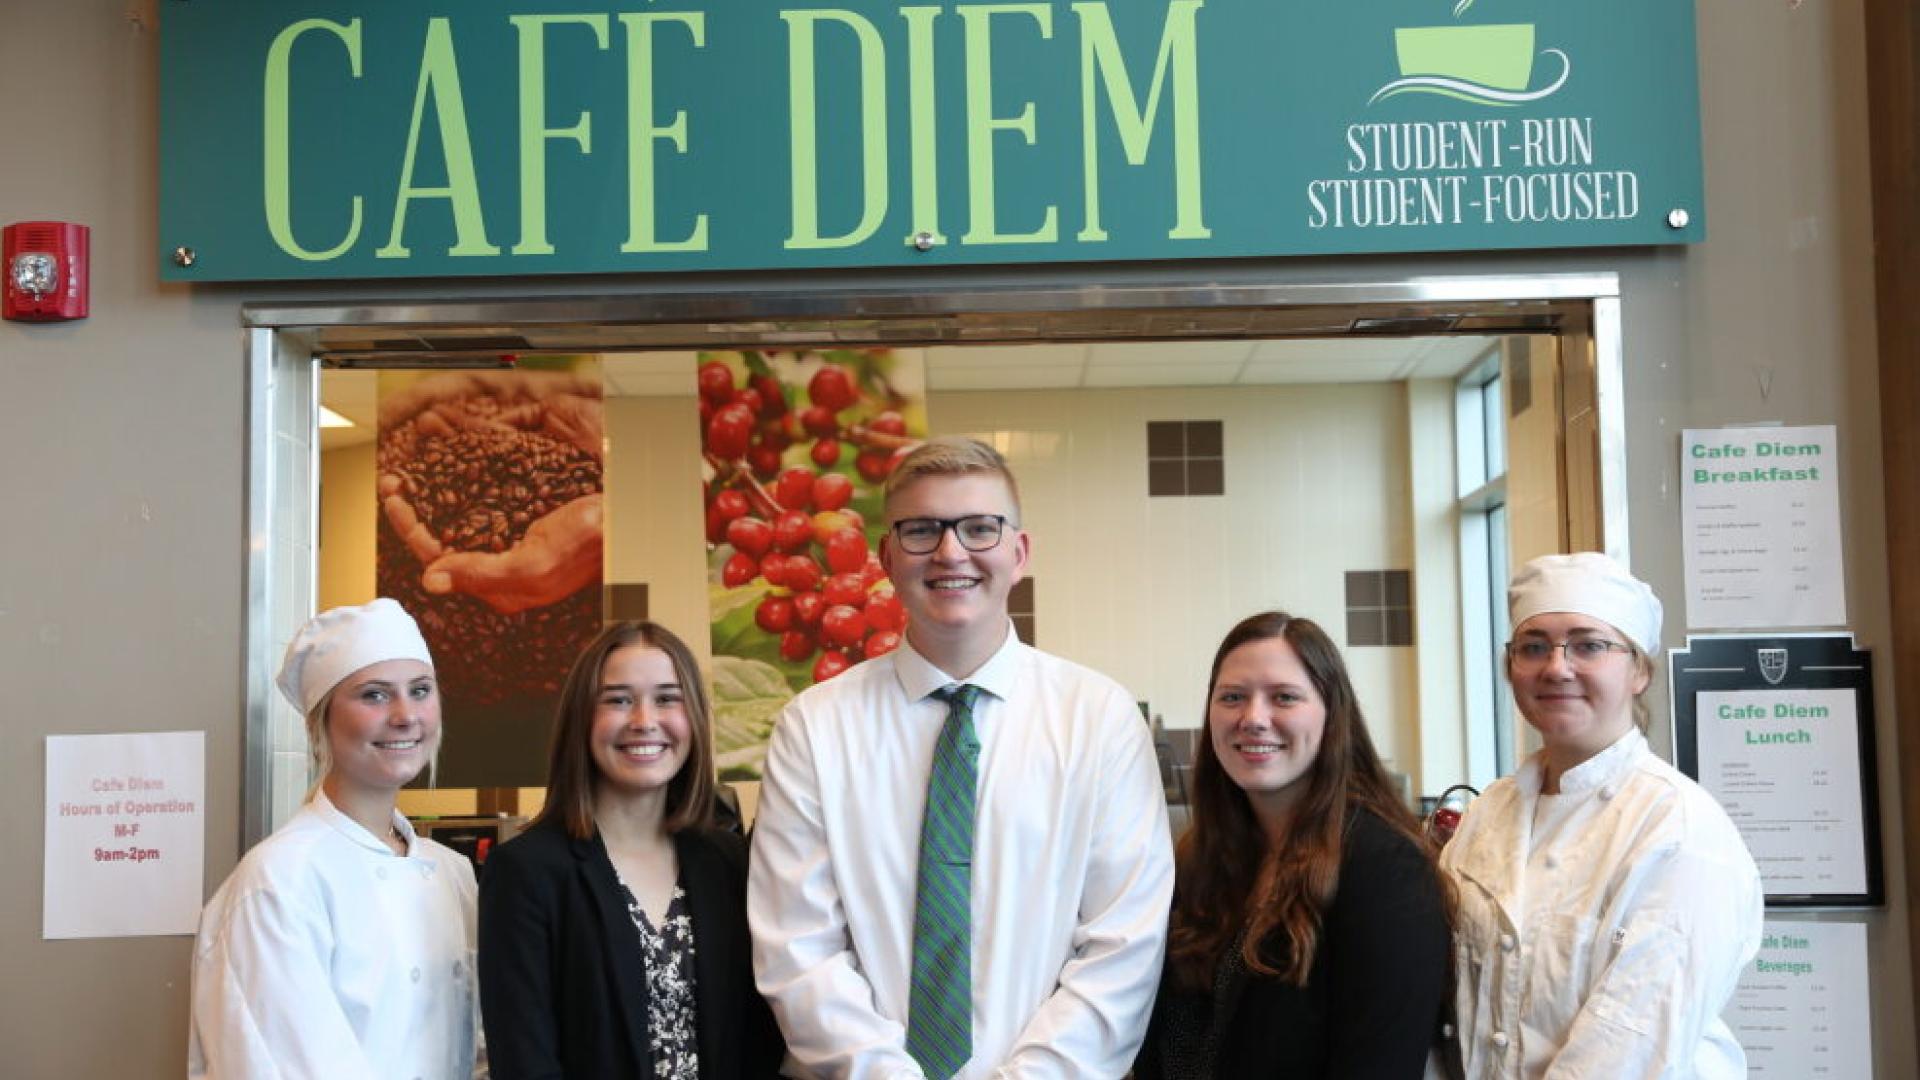 Students standing in front of Cafe Diem